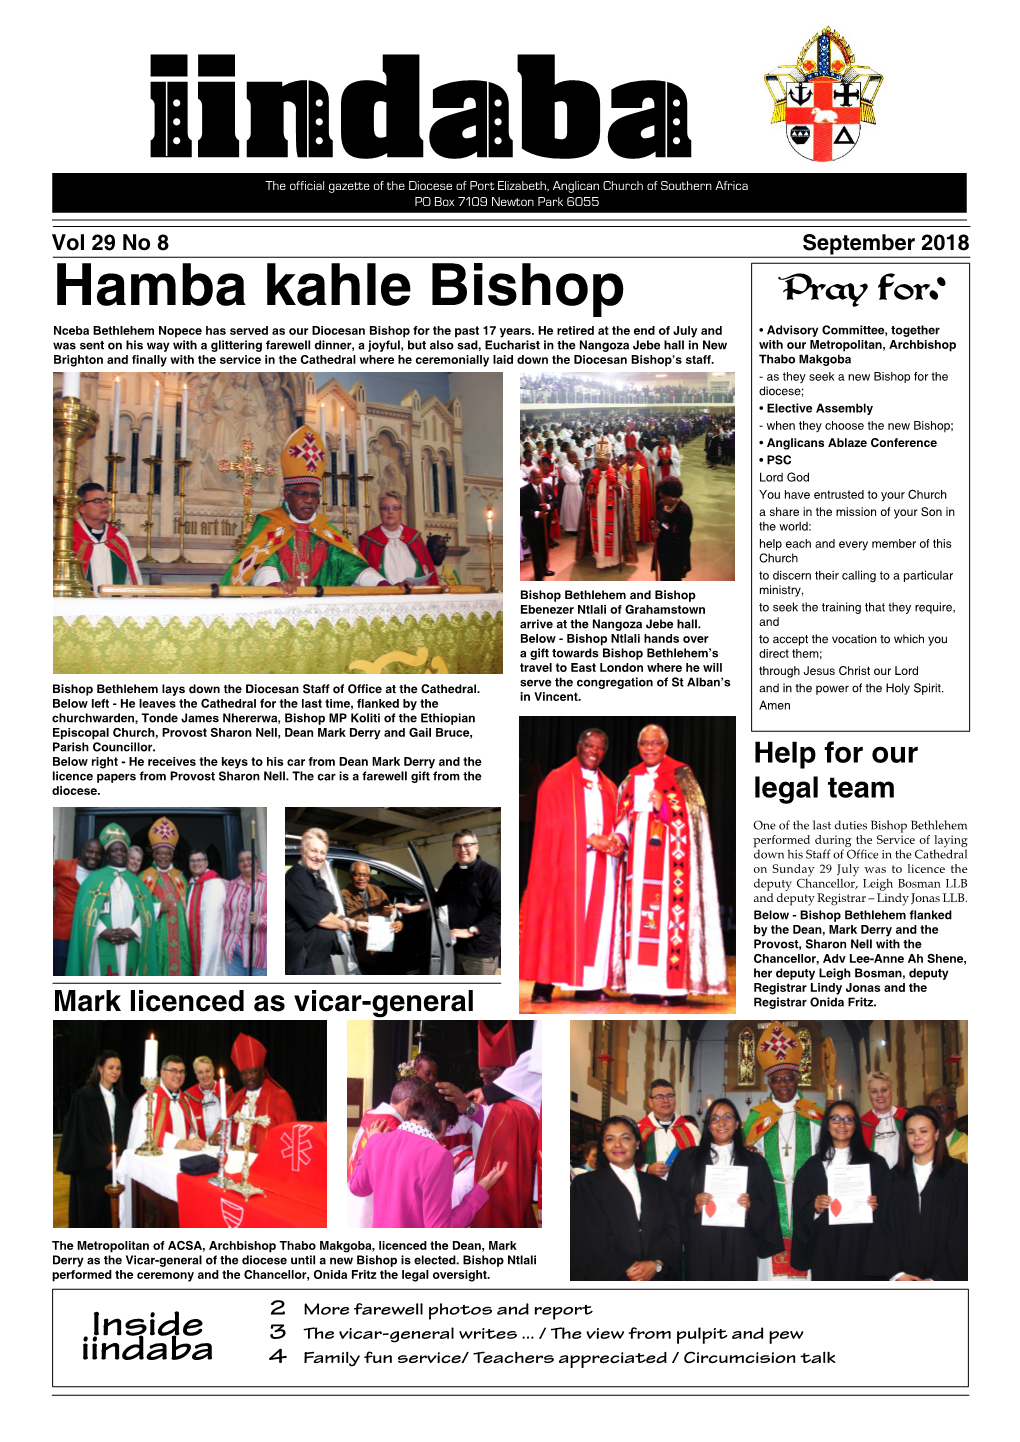 Hamba Kahle Bishop Pray For: Nceba Bethlehem Nopece Has Served As Our Diocesan Bishop for the Past 17 Years